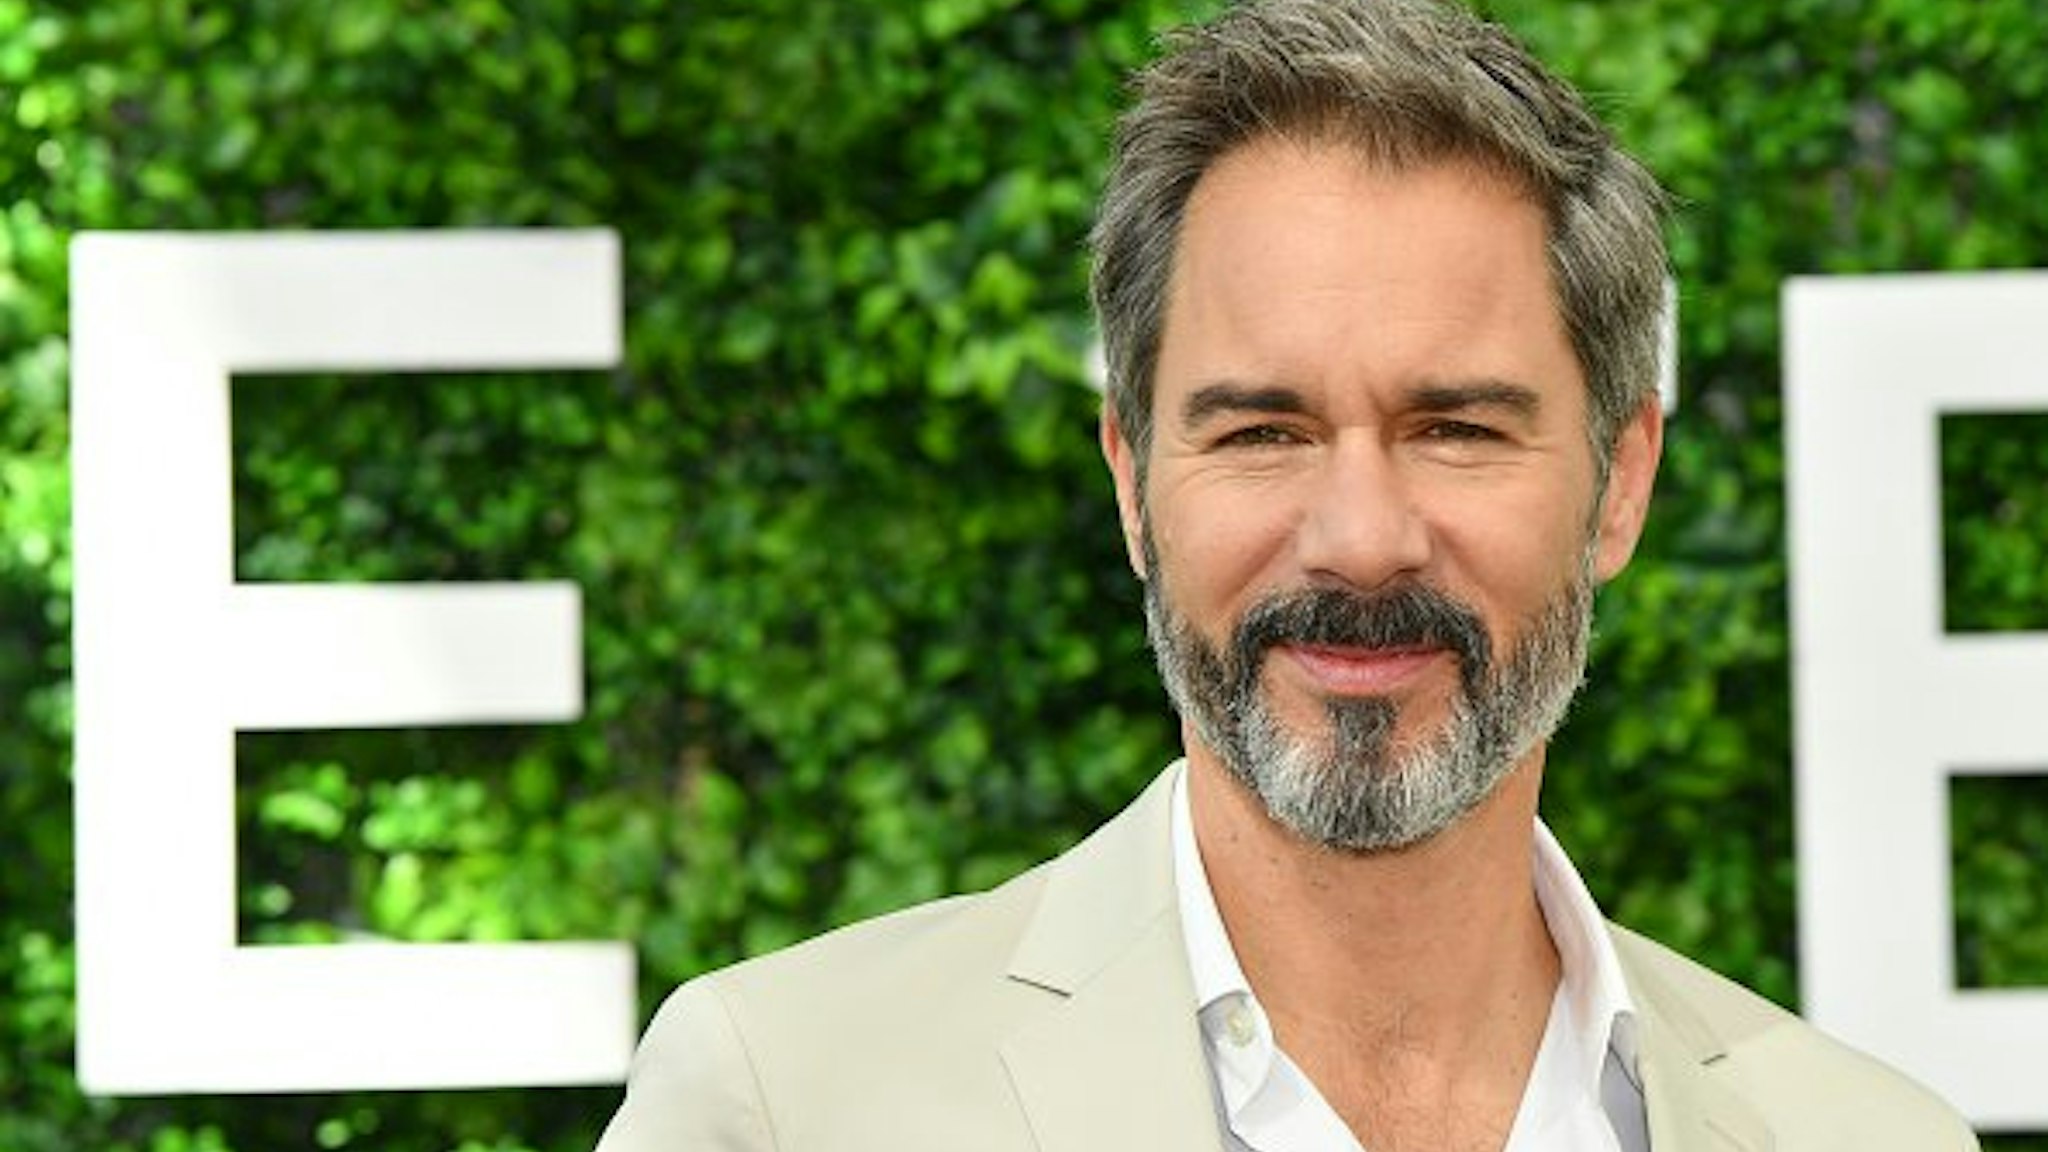 Eric McCormack from the serie "Will & Grace" attends the 59th Monte Carlo TV Festival : Day Four on June 17, 2019 in Monte-Carlo, Monaco.